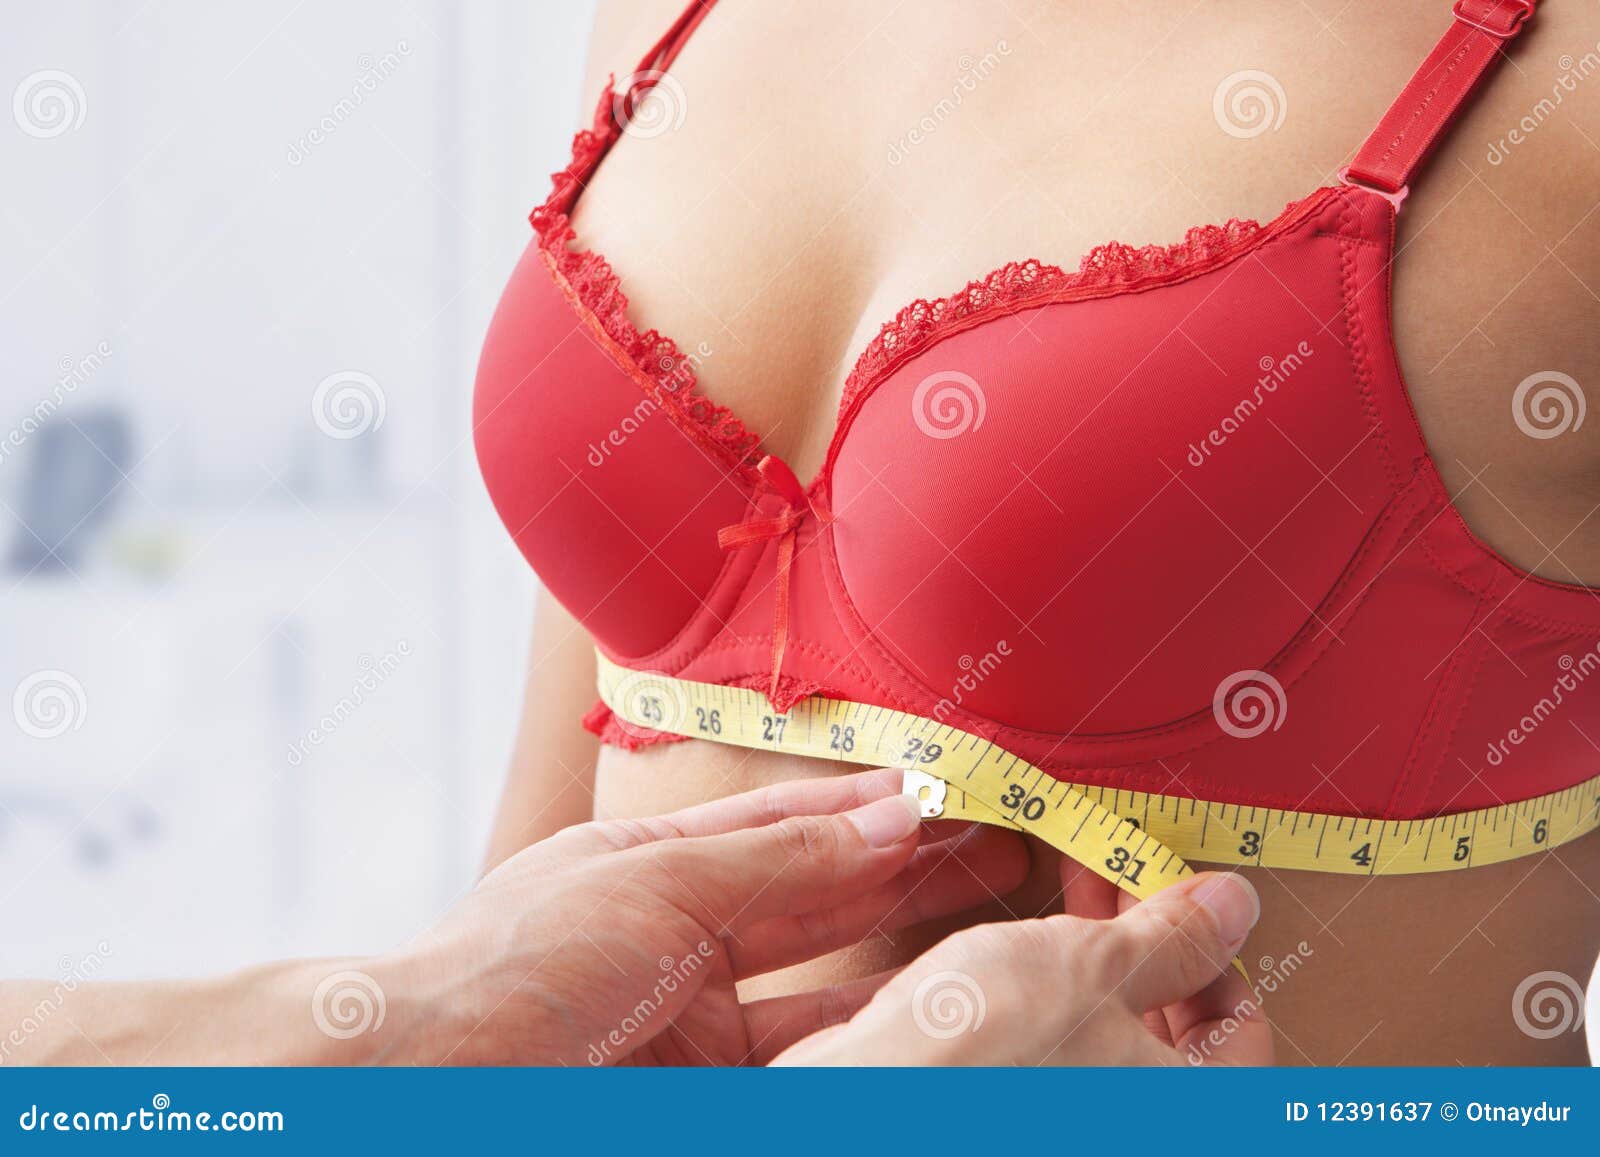 Measuring bust base size stock image. Image of chest - 12391637